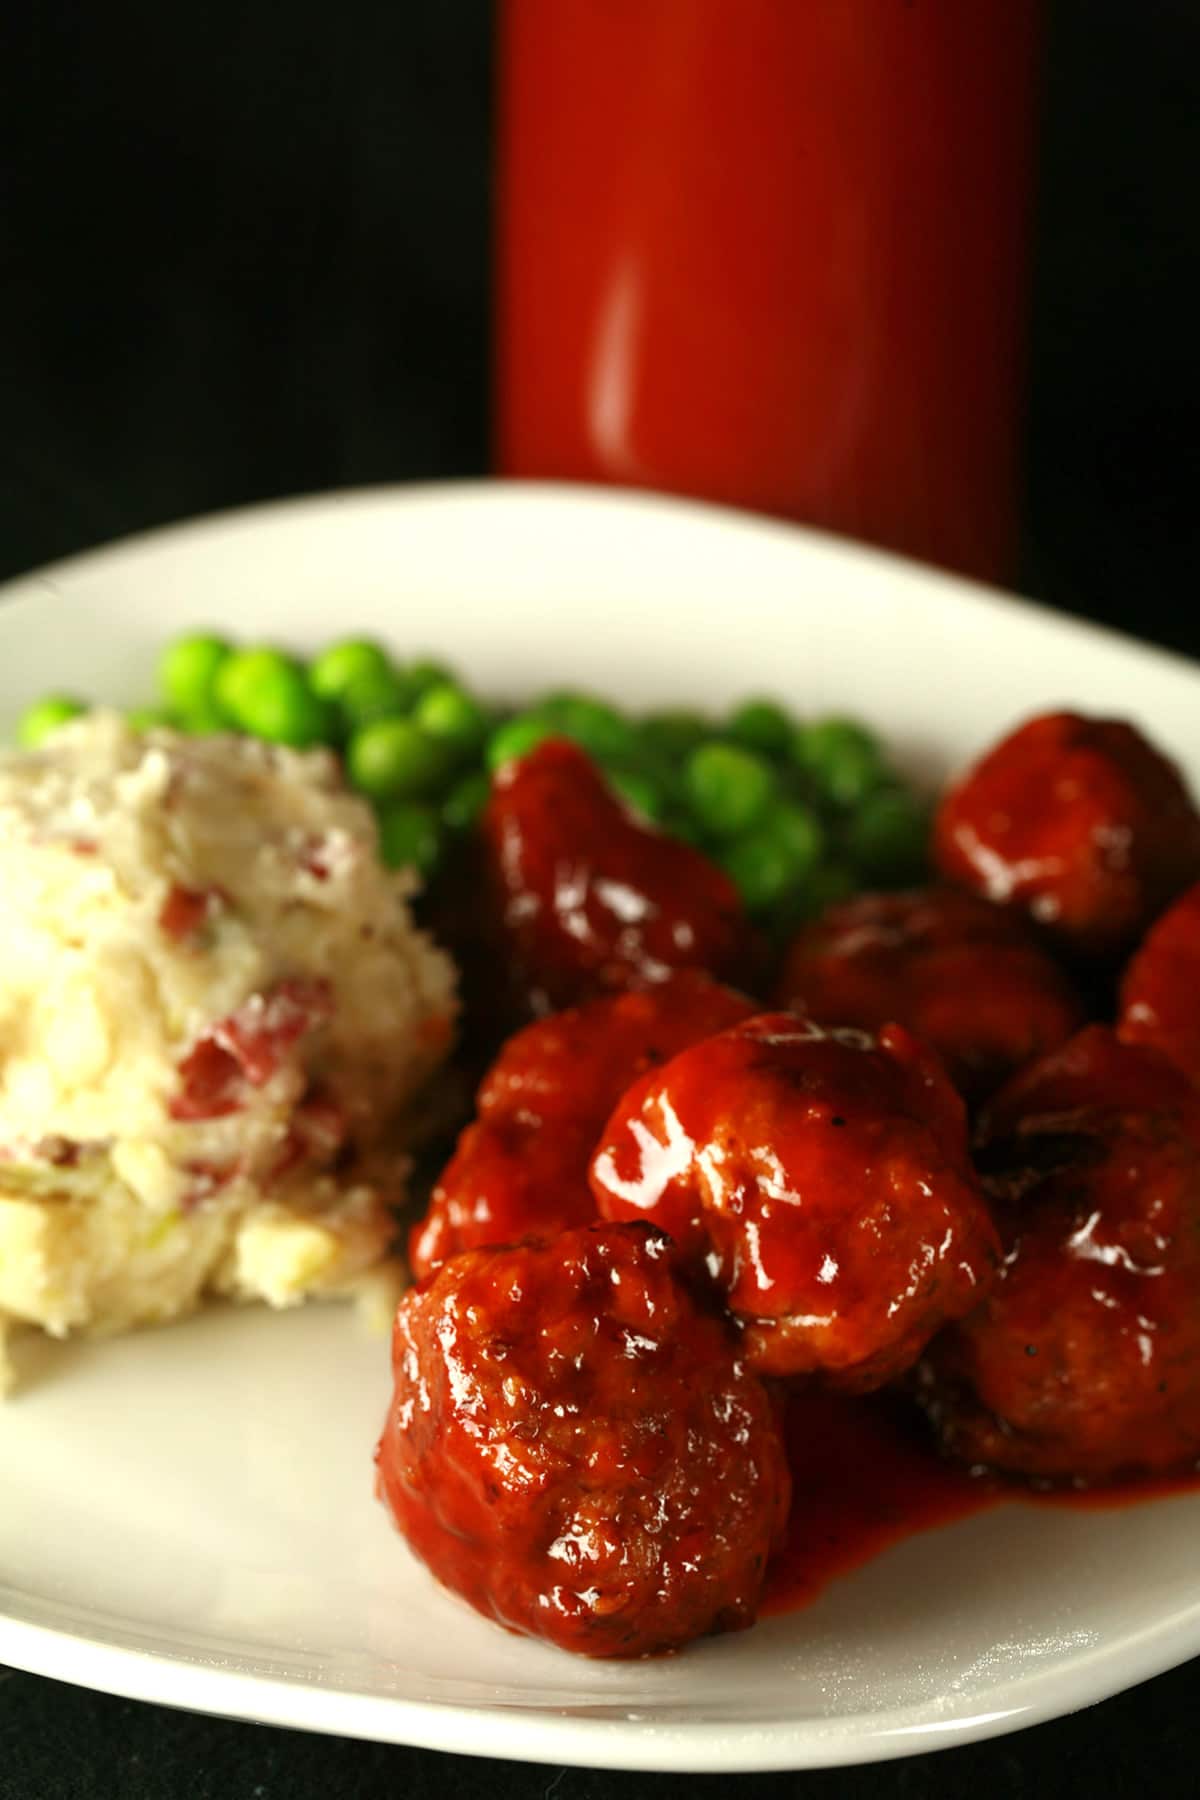 A plate of BBQ meatballs, mashed potatoes, and peas. The meatballs are coated in replica Original Diana Sauce. A bottle of the sauce rests behind the plate of food.